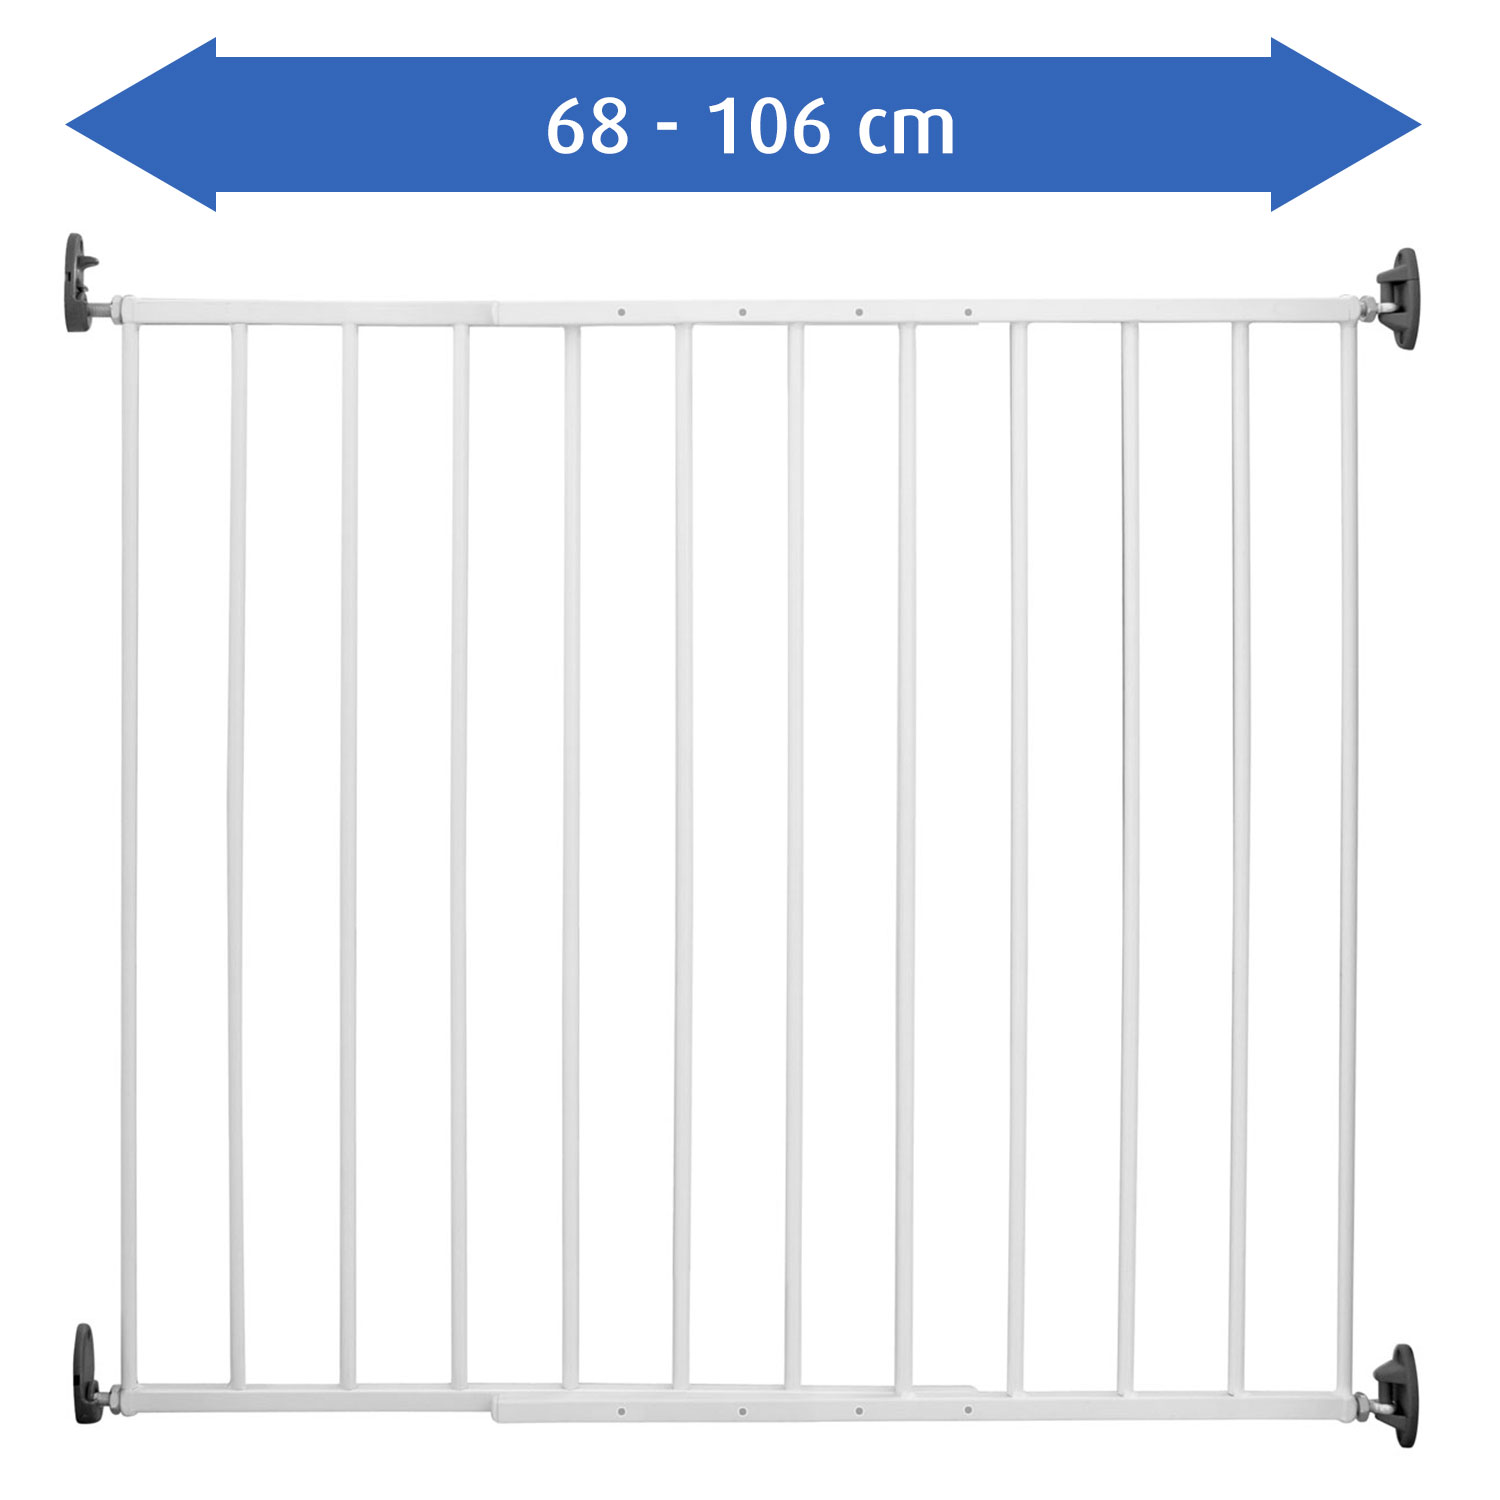 Basic wall-mounted gate for gateway widths from 68 - 106 cm